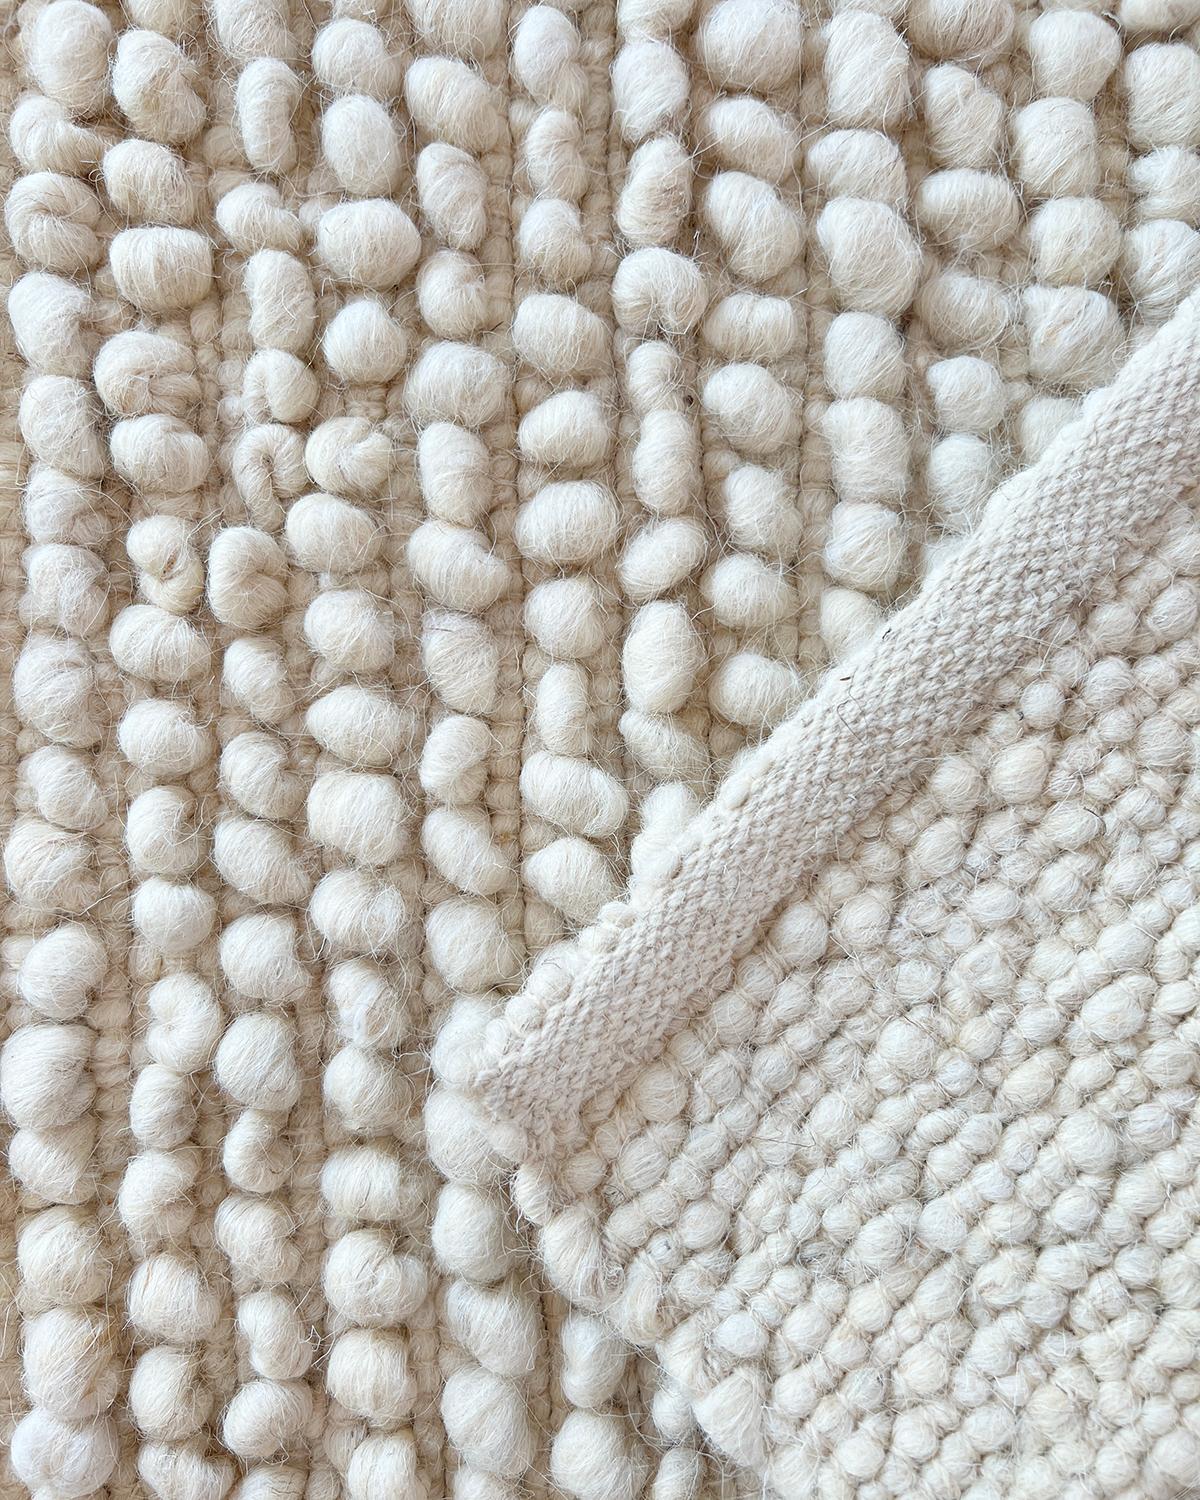 Organic Modern Fatima Bobble Sheep Wool Area Rug in White 2.5ft by 4ft, Handmade For Sale